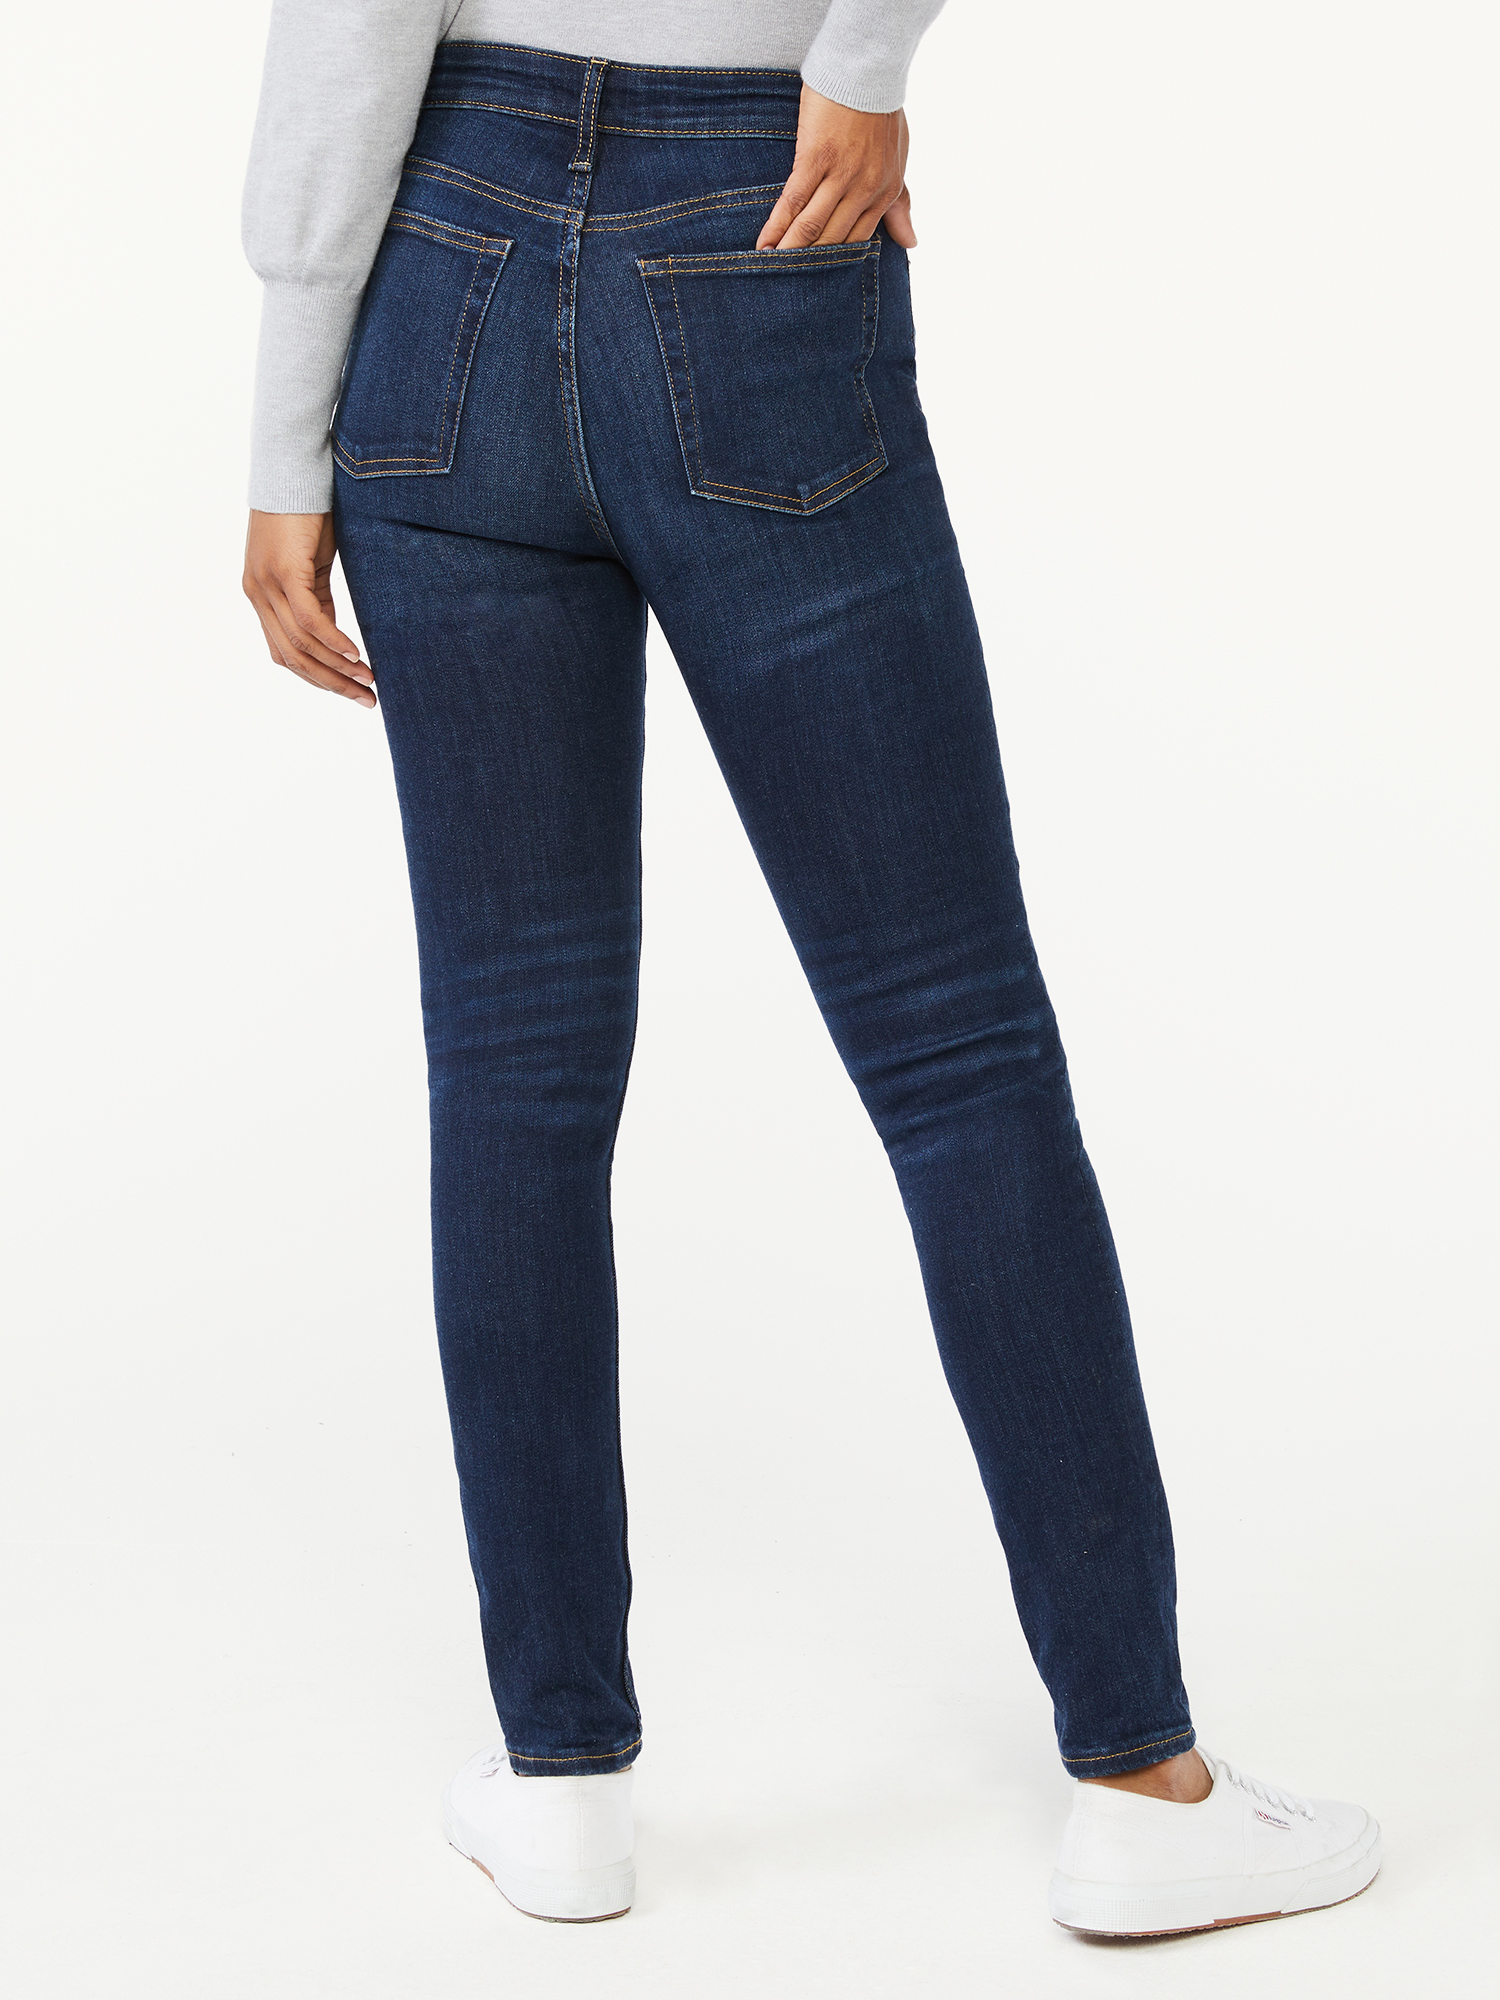 Free Assembly Women's High Rise Skinny Jeans - Walmart.com